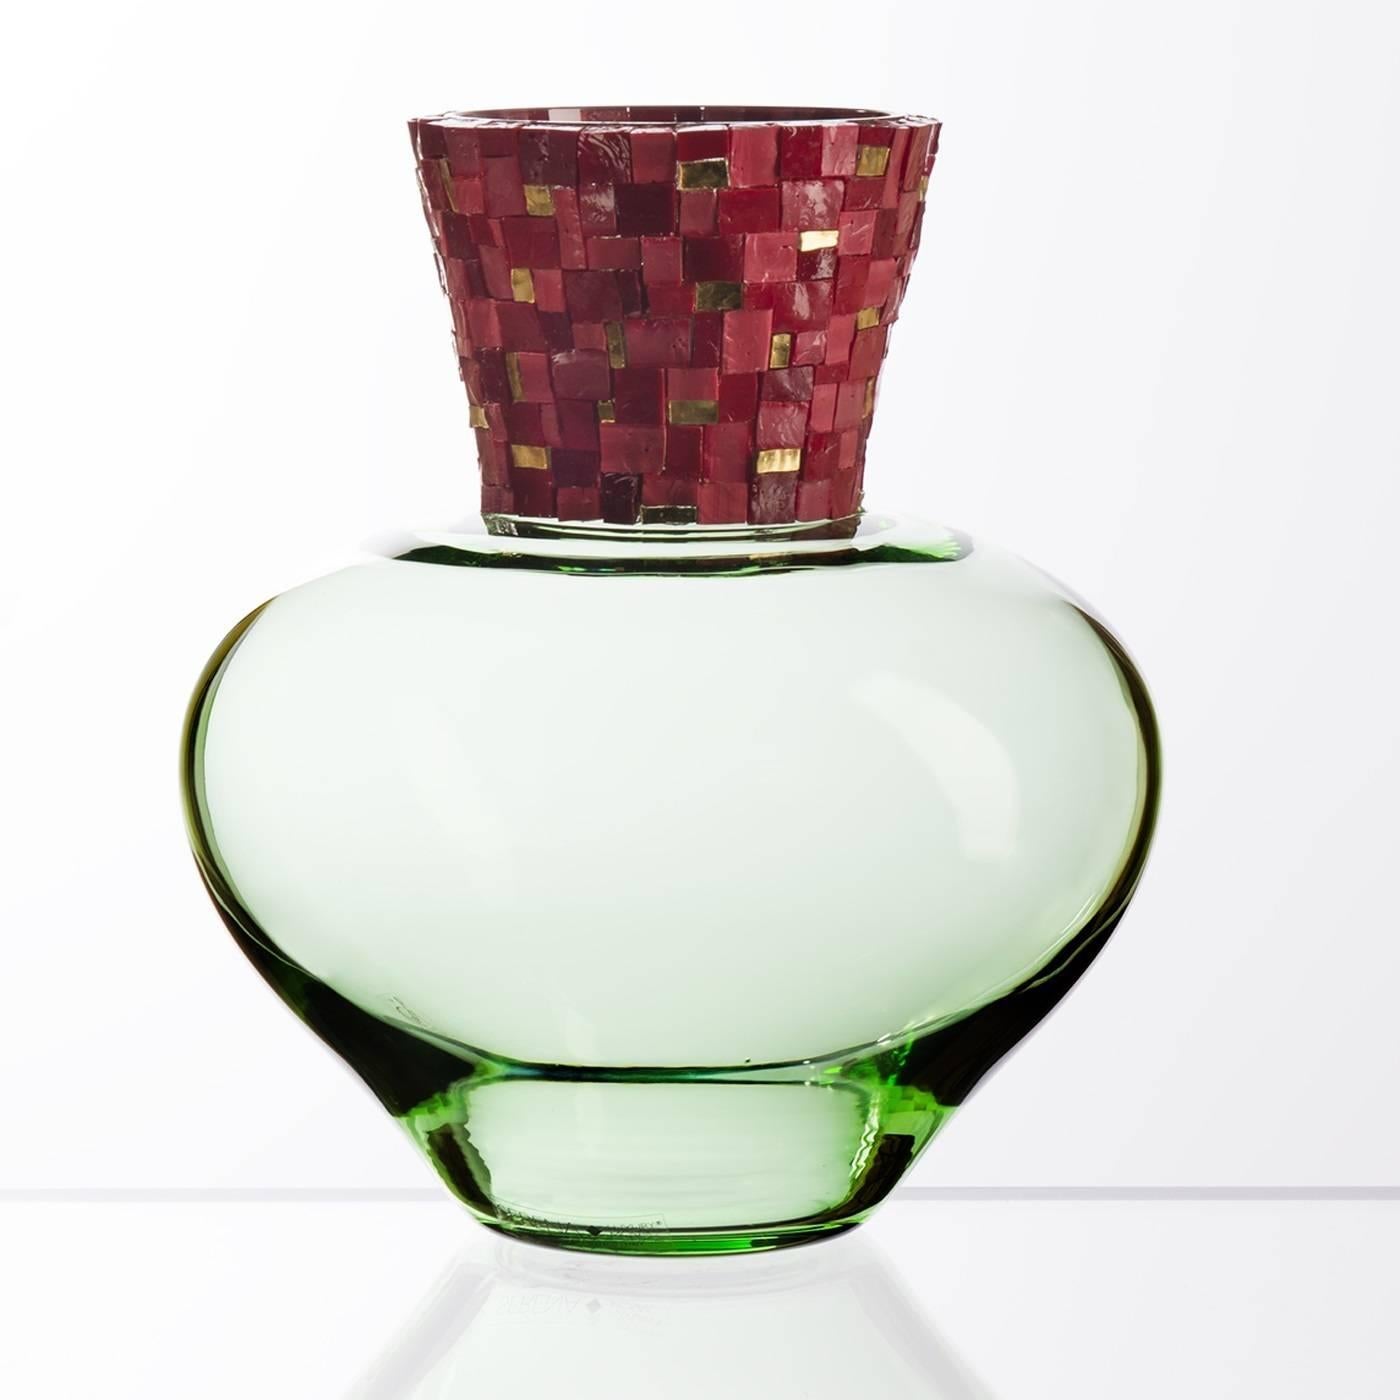 Designed and handmade in Murano using ancient techniques and precious materials, this exquisite Murano mouth-blown glass vase has a delicate green base with a richly accented neck. The mosaic is made of gold foil tesserae and opaque and transparent